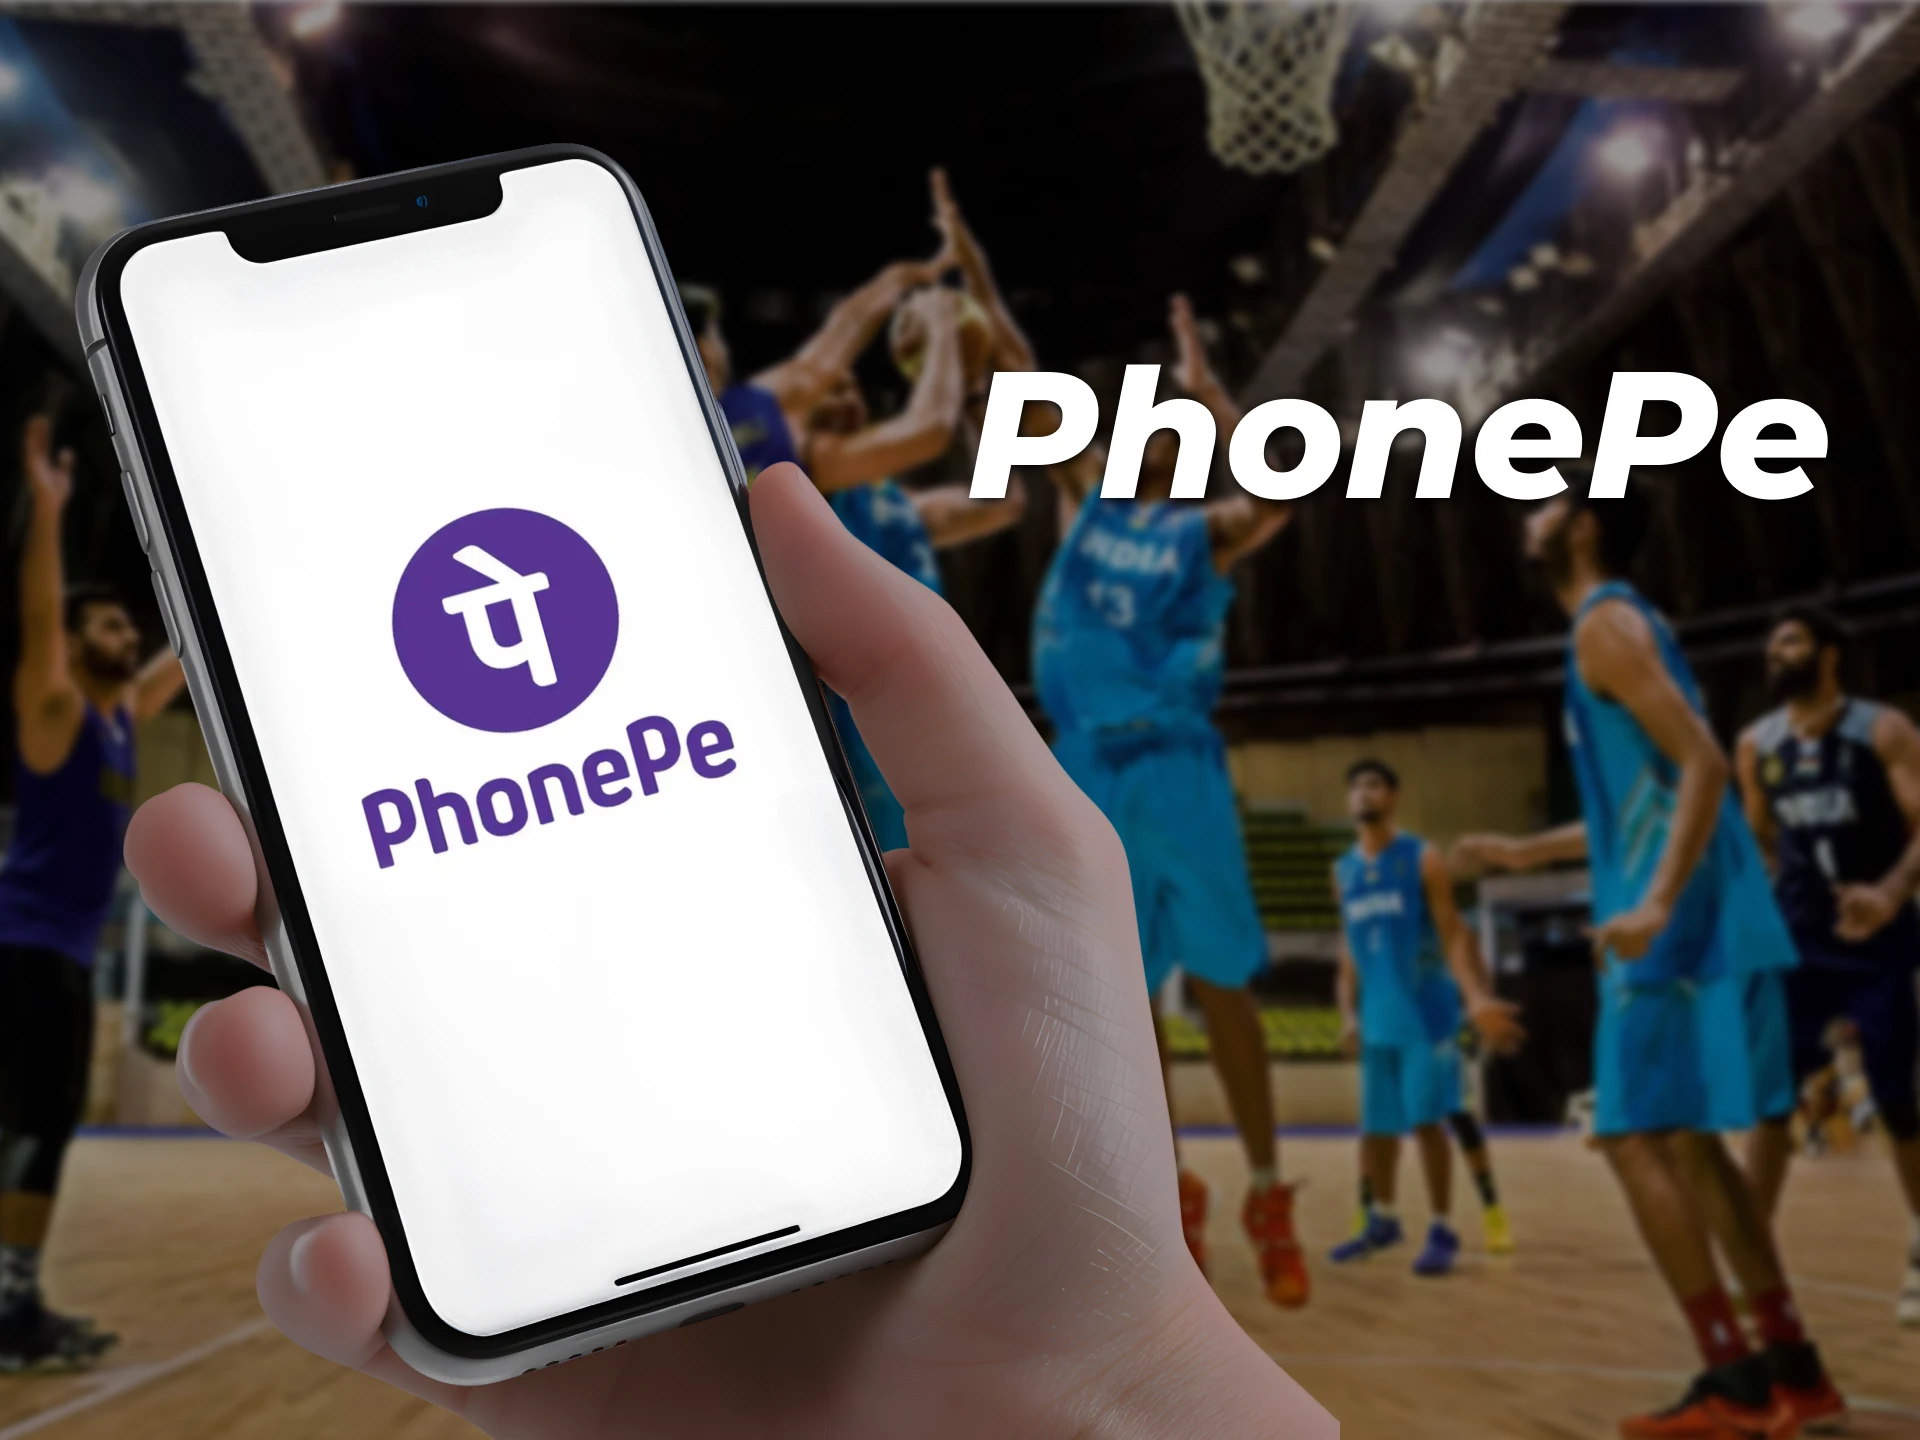 Try using PhonePe to make deposits and withdrawals on betting sites.